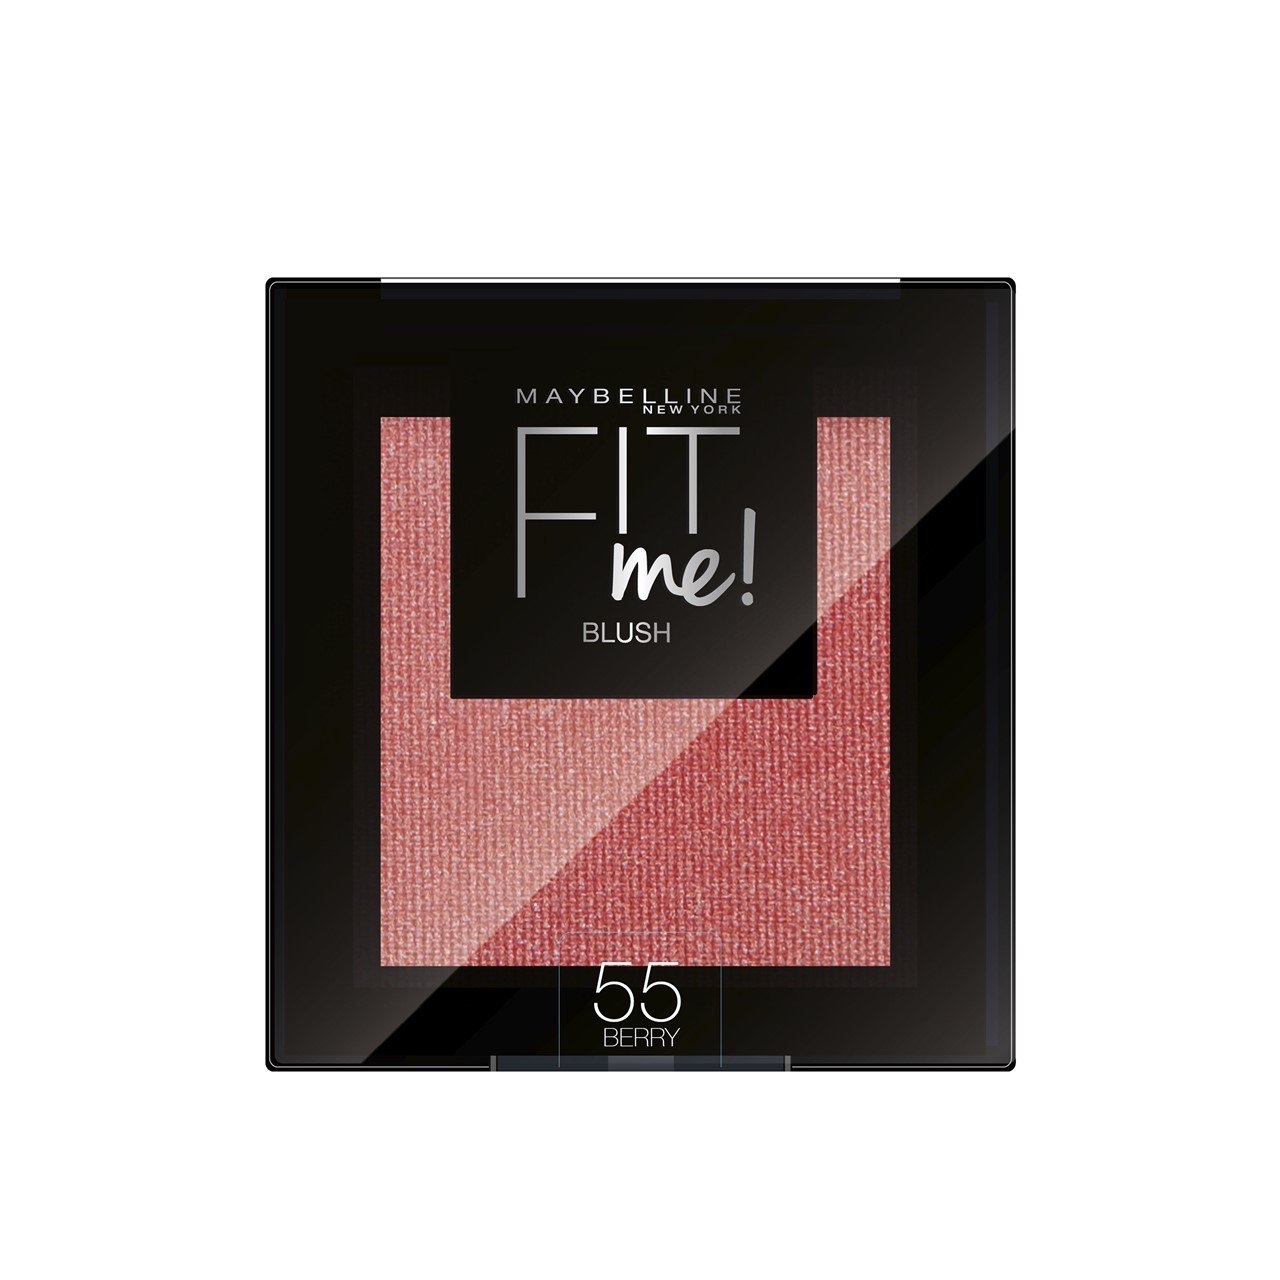 Maybelline Fit Me Blush 55 Berry 5g (0.18oz)